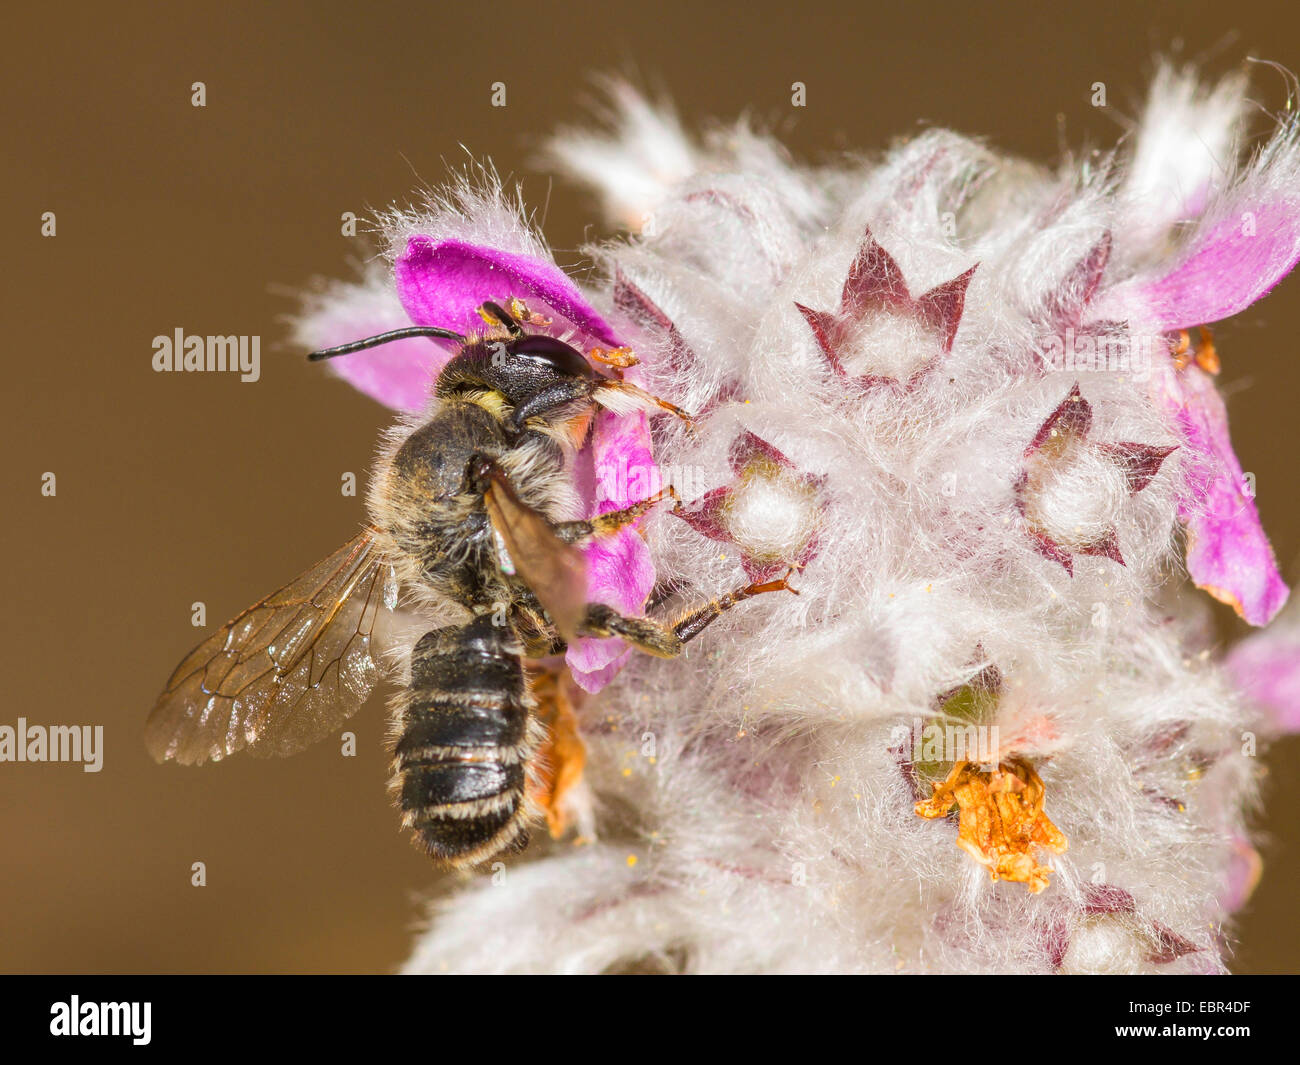 Leafcutter bee, Leafcutter-bee (Megachile ericetorum, Chalicodoma ericetorum, Pseudomegachile ericetorum), male foraging on Stachys byzantina, Germany Stock Photo